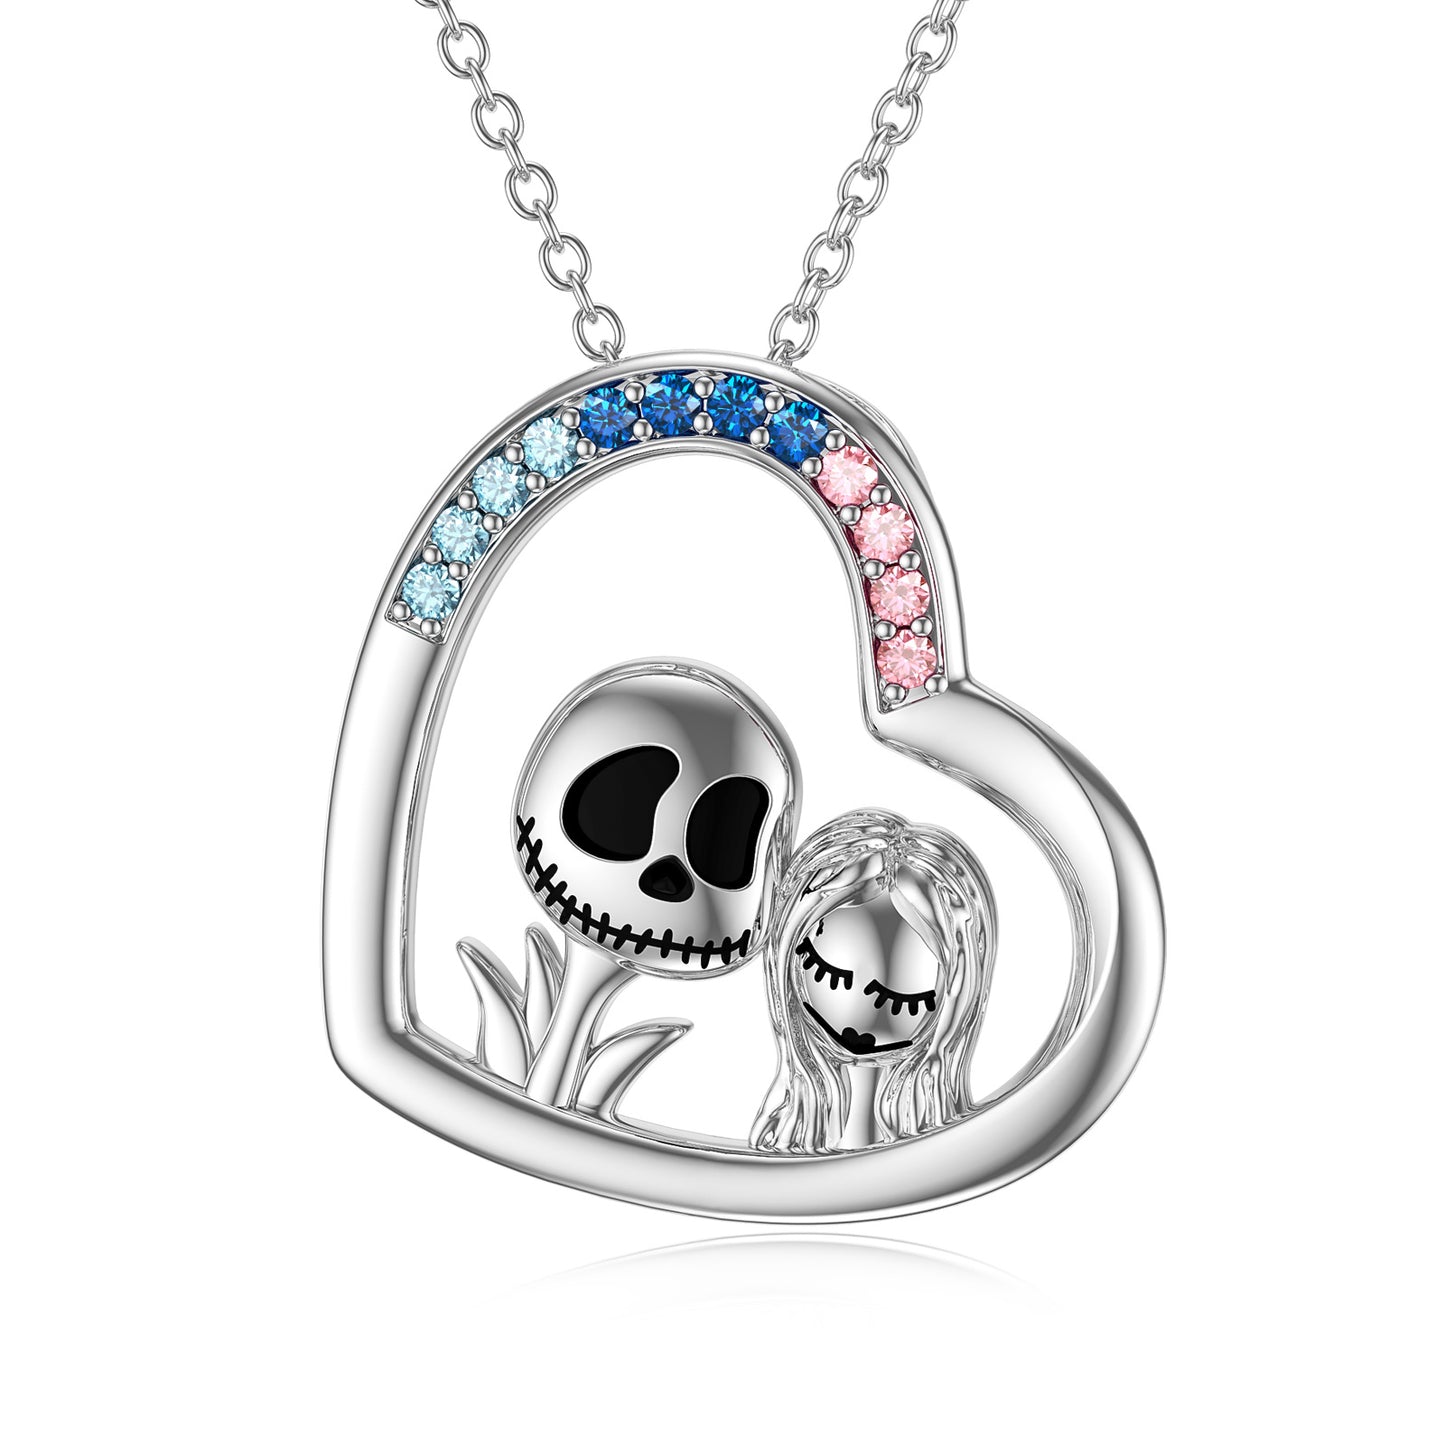 Nightmare Before Christmas Jewelry Gifts 925 Sterling Silver Jack Skellington and Sally Heart Pendant Necklace for Women Girls Halloween